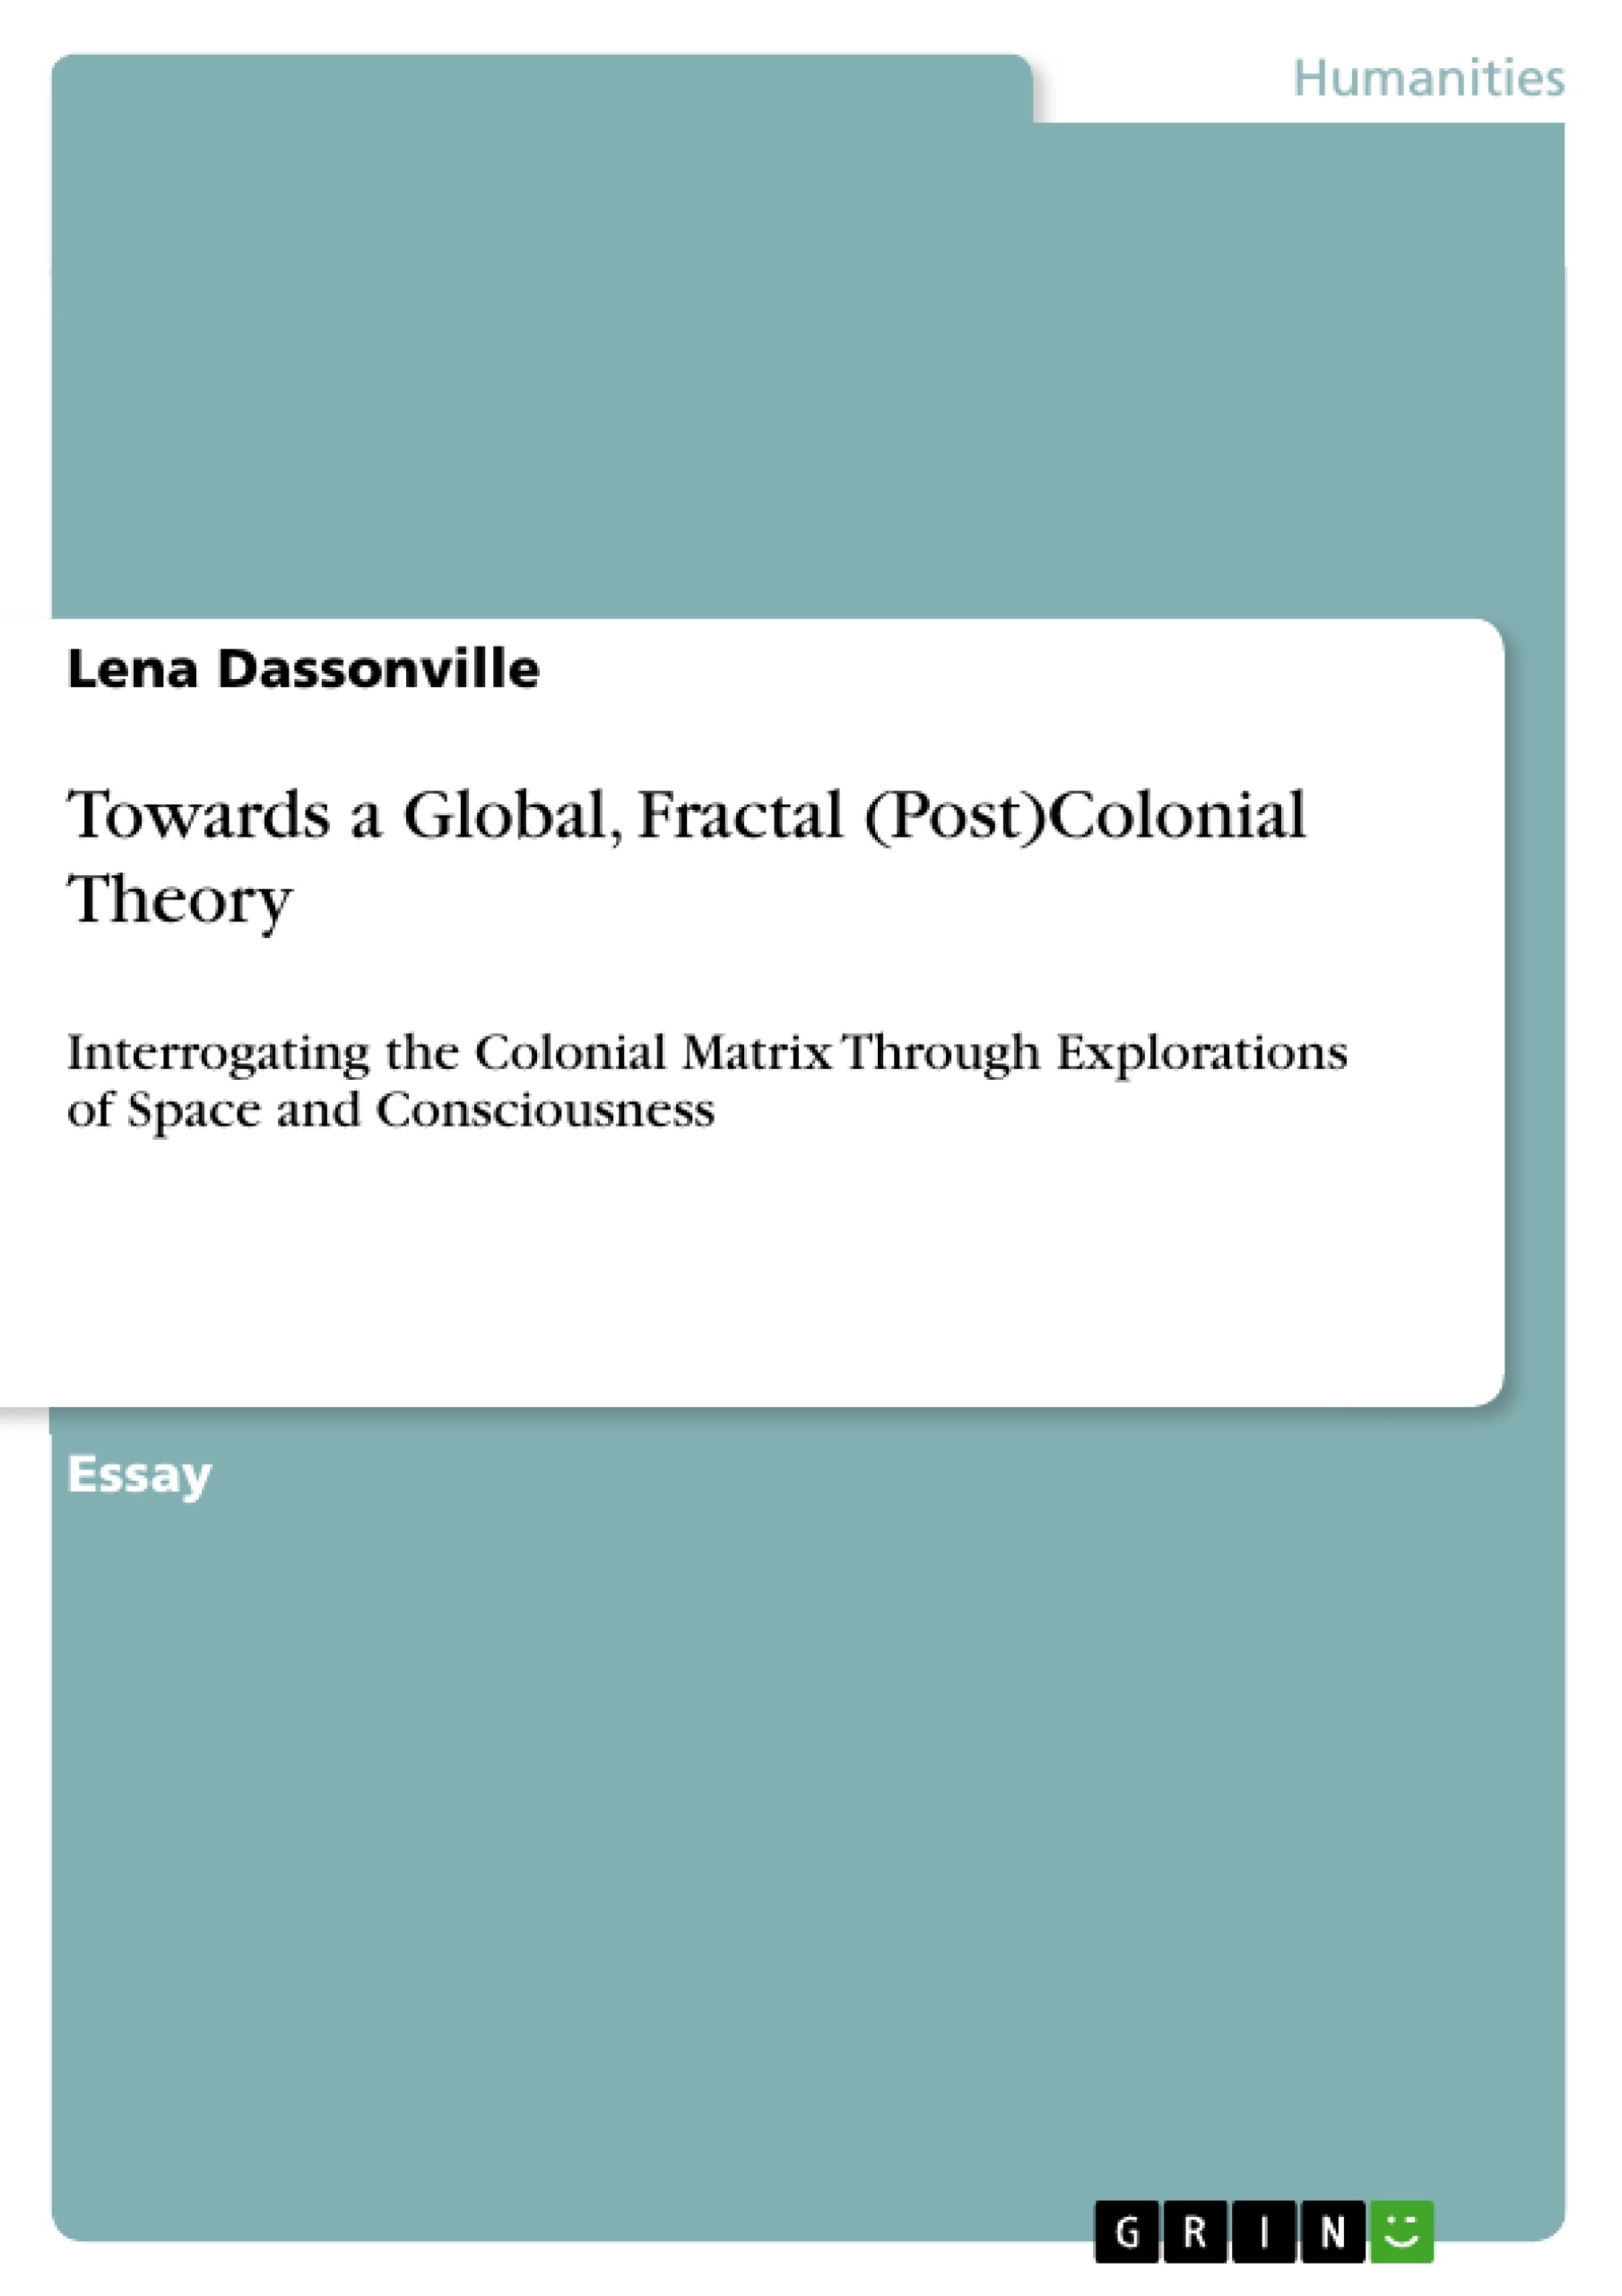 Title: Towards a Global, Fractal (Post)Colonial Theory